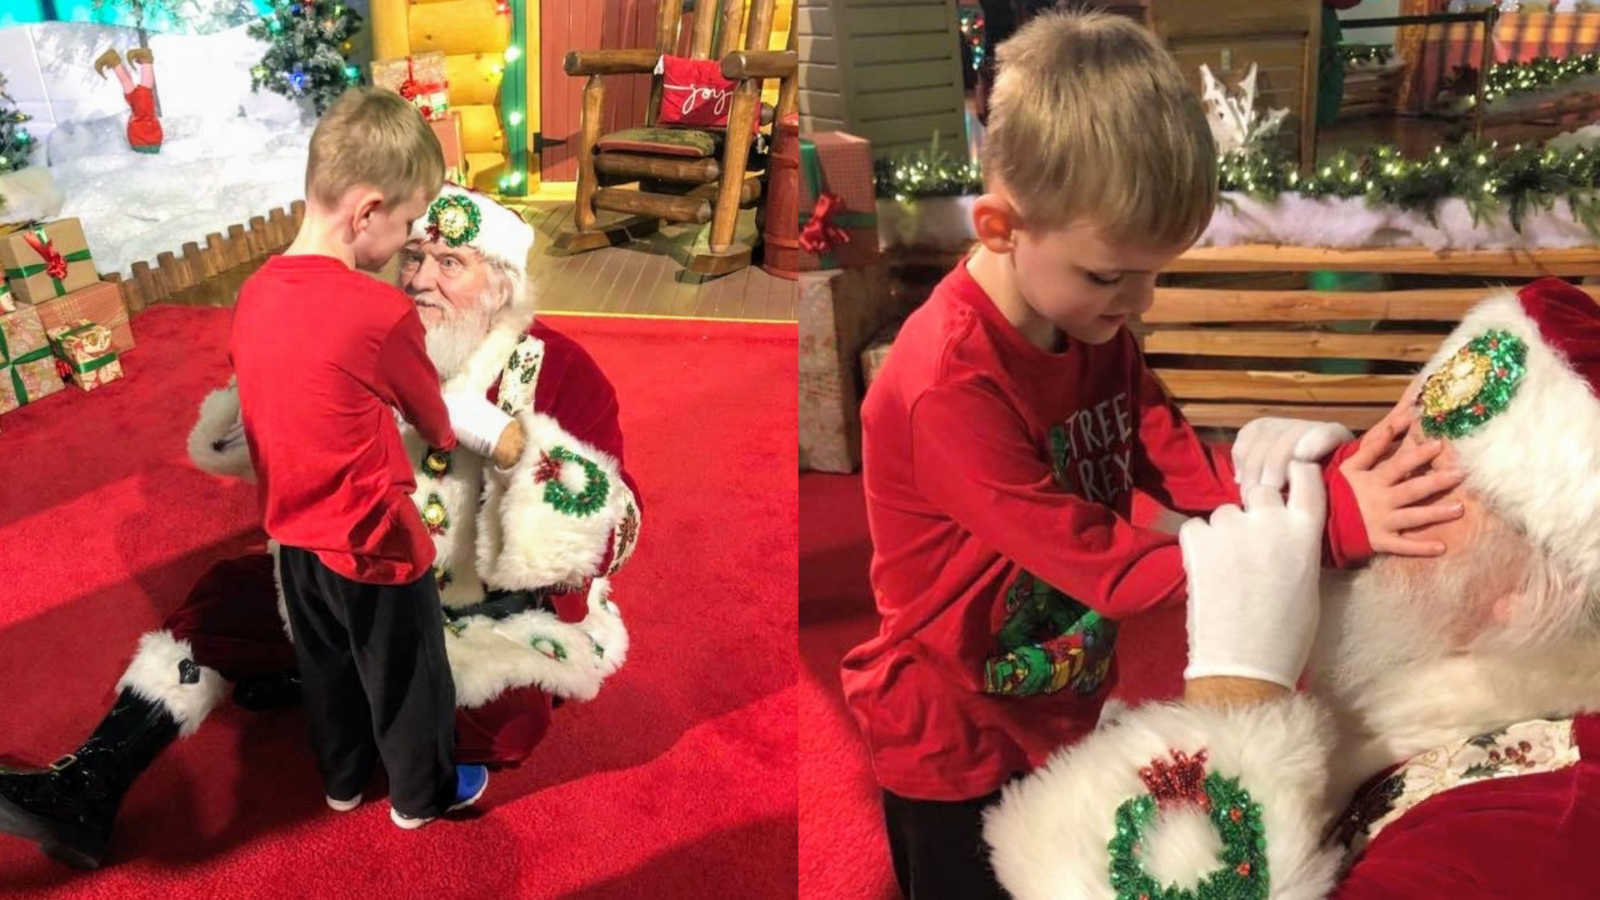 blind, autistic boy having magical experience with Santa